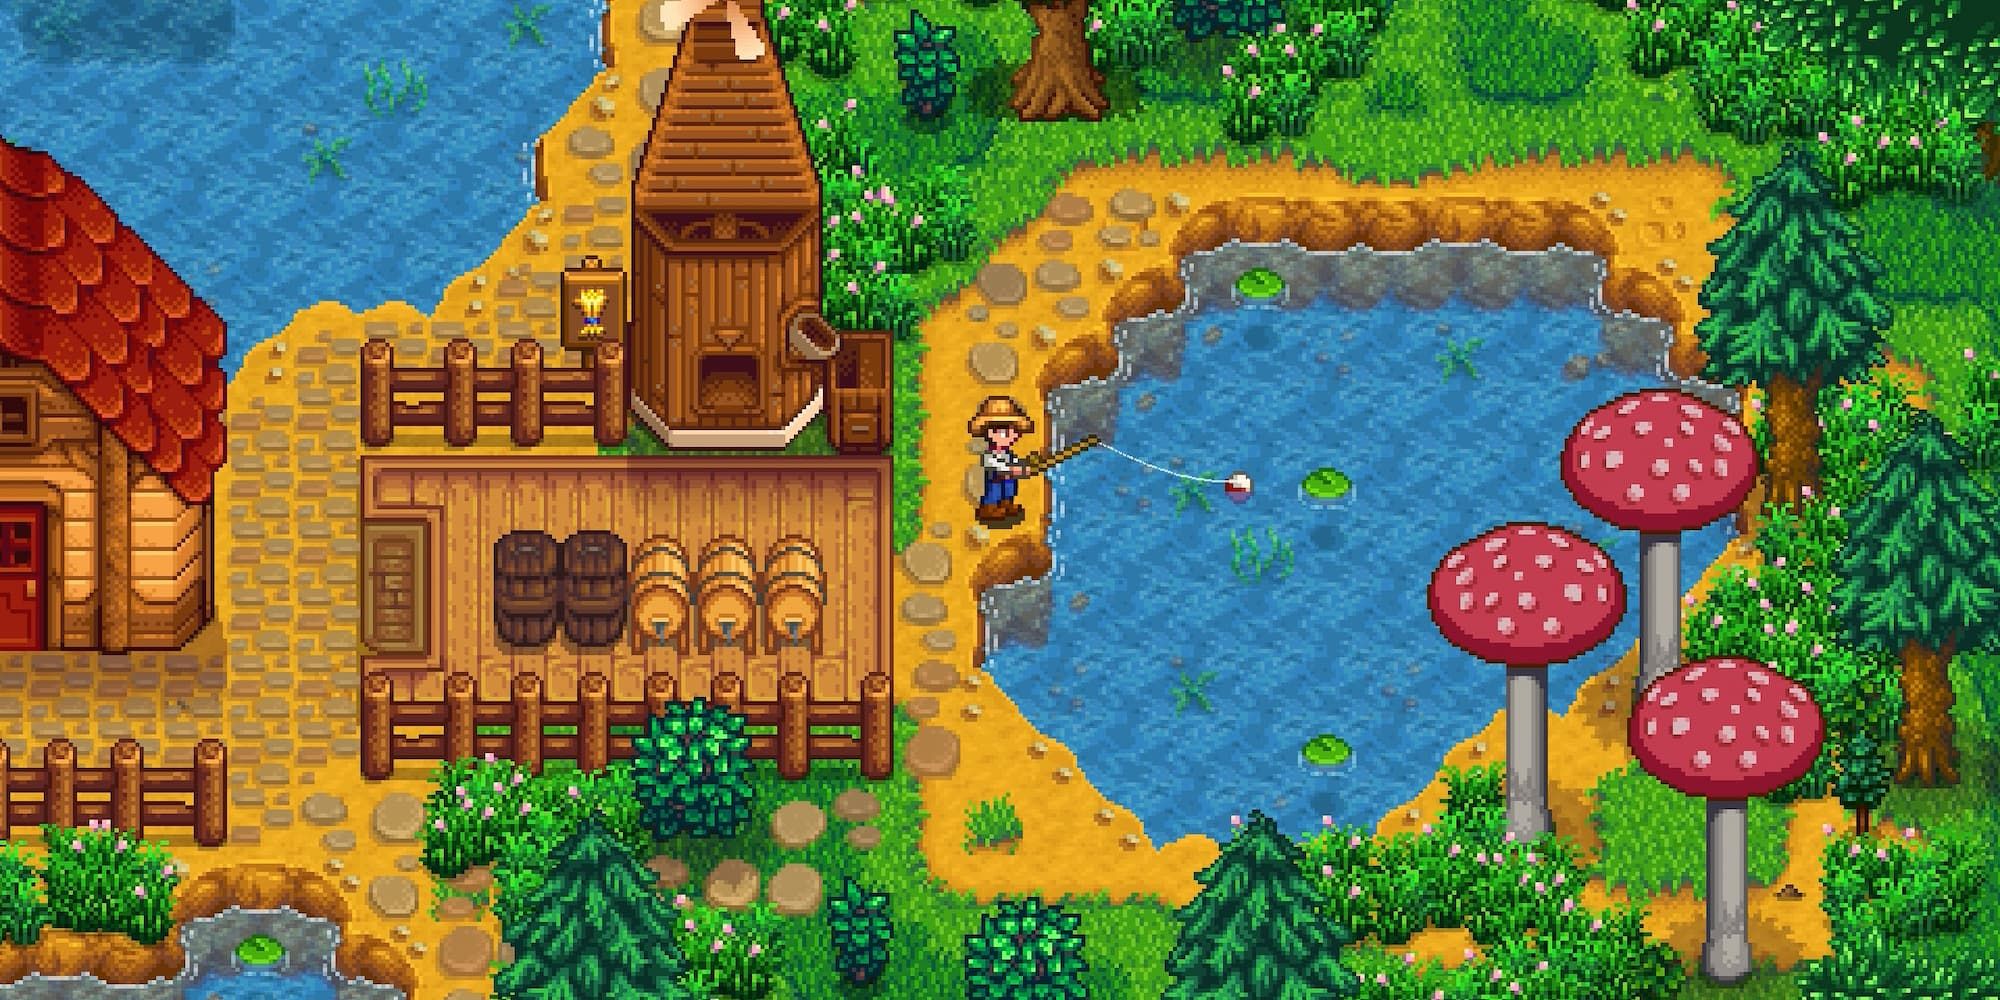 A man fishes in a pond next to a windmill in Stardew Valley.